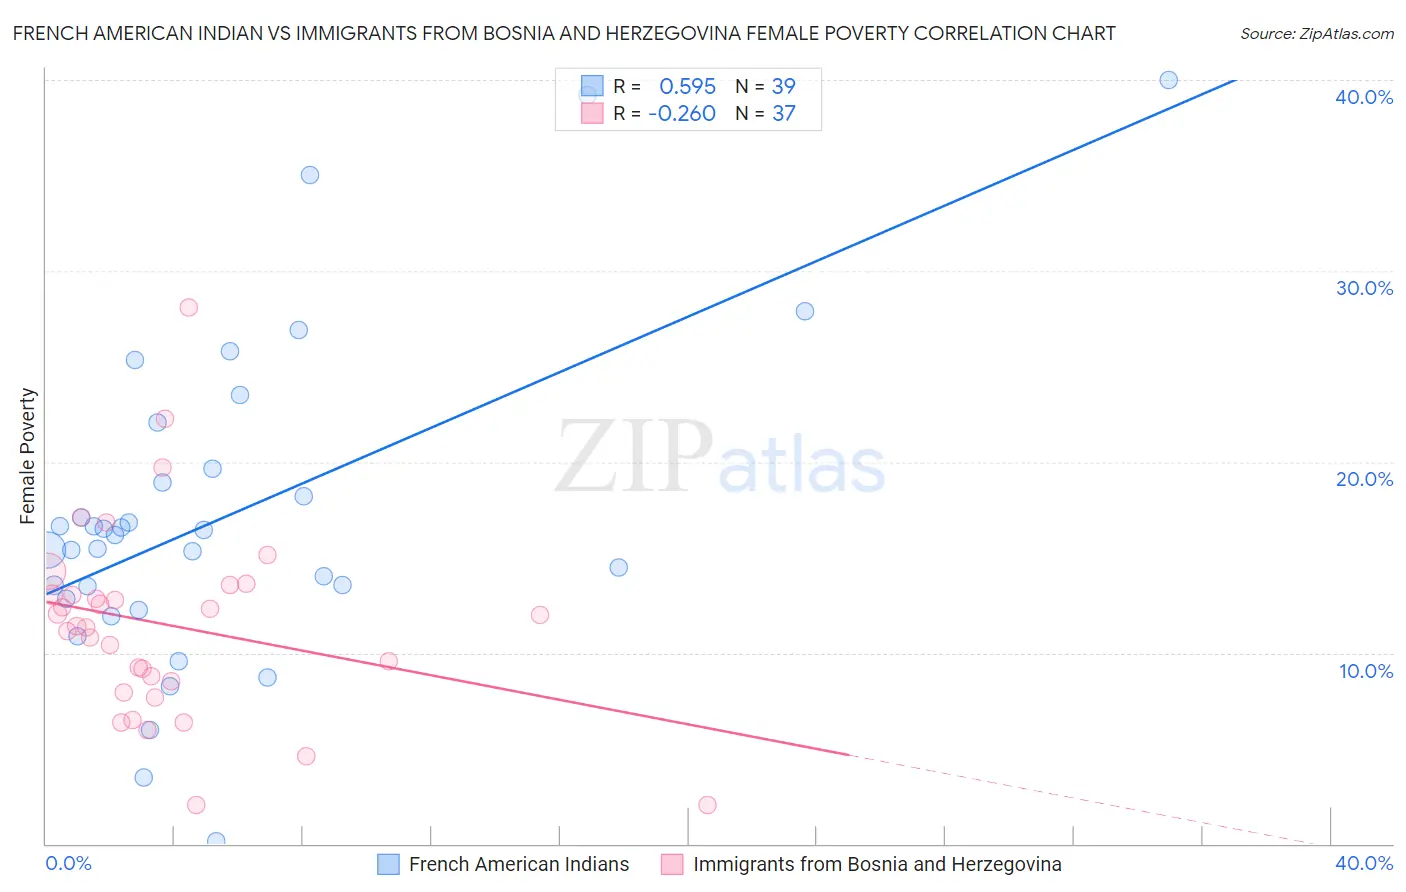 French American Indian vs Immigrants from Bosnia and Herzegovina Female Poverty